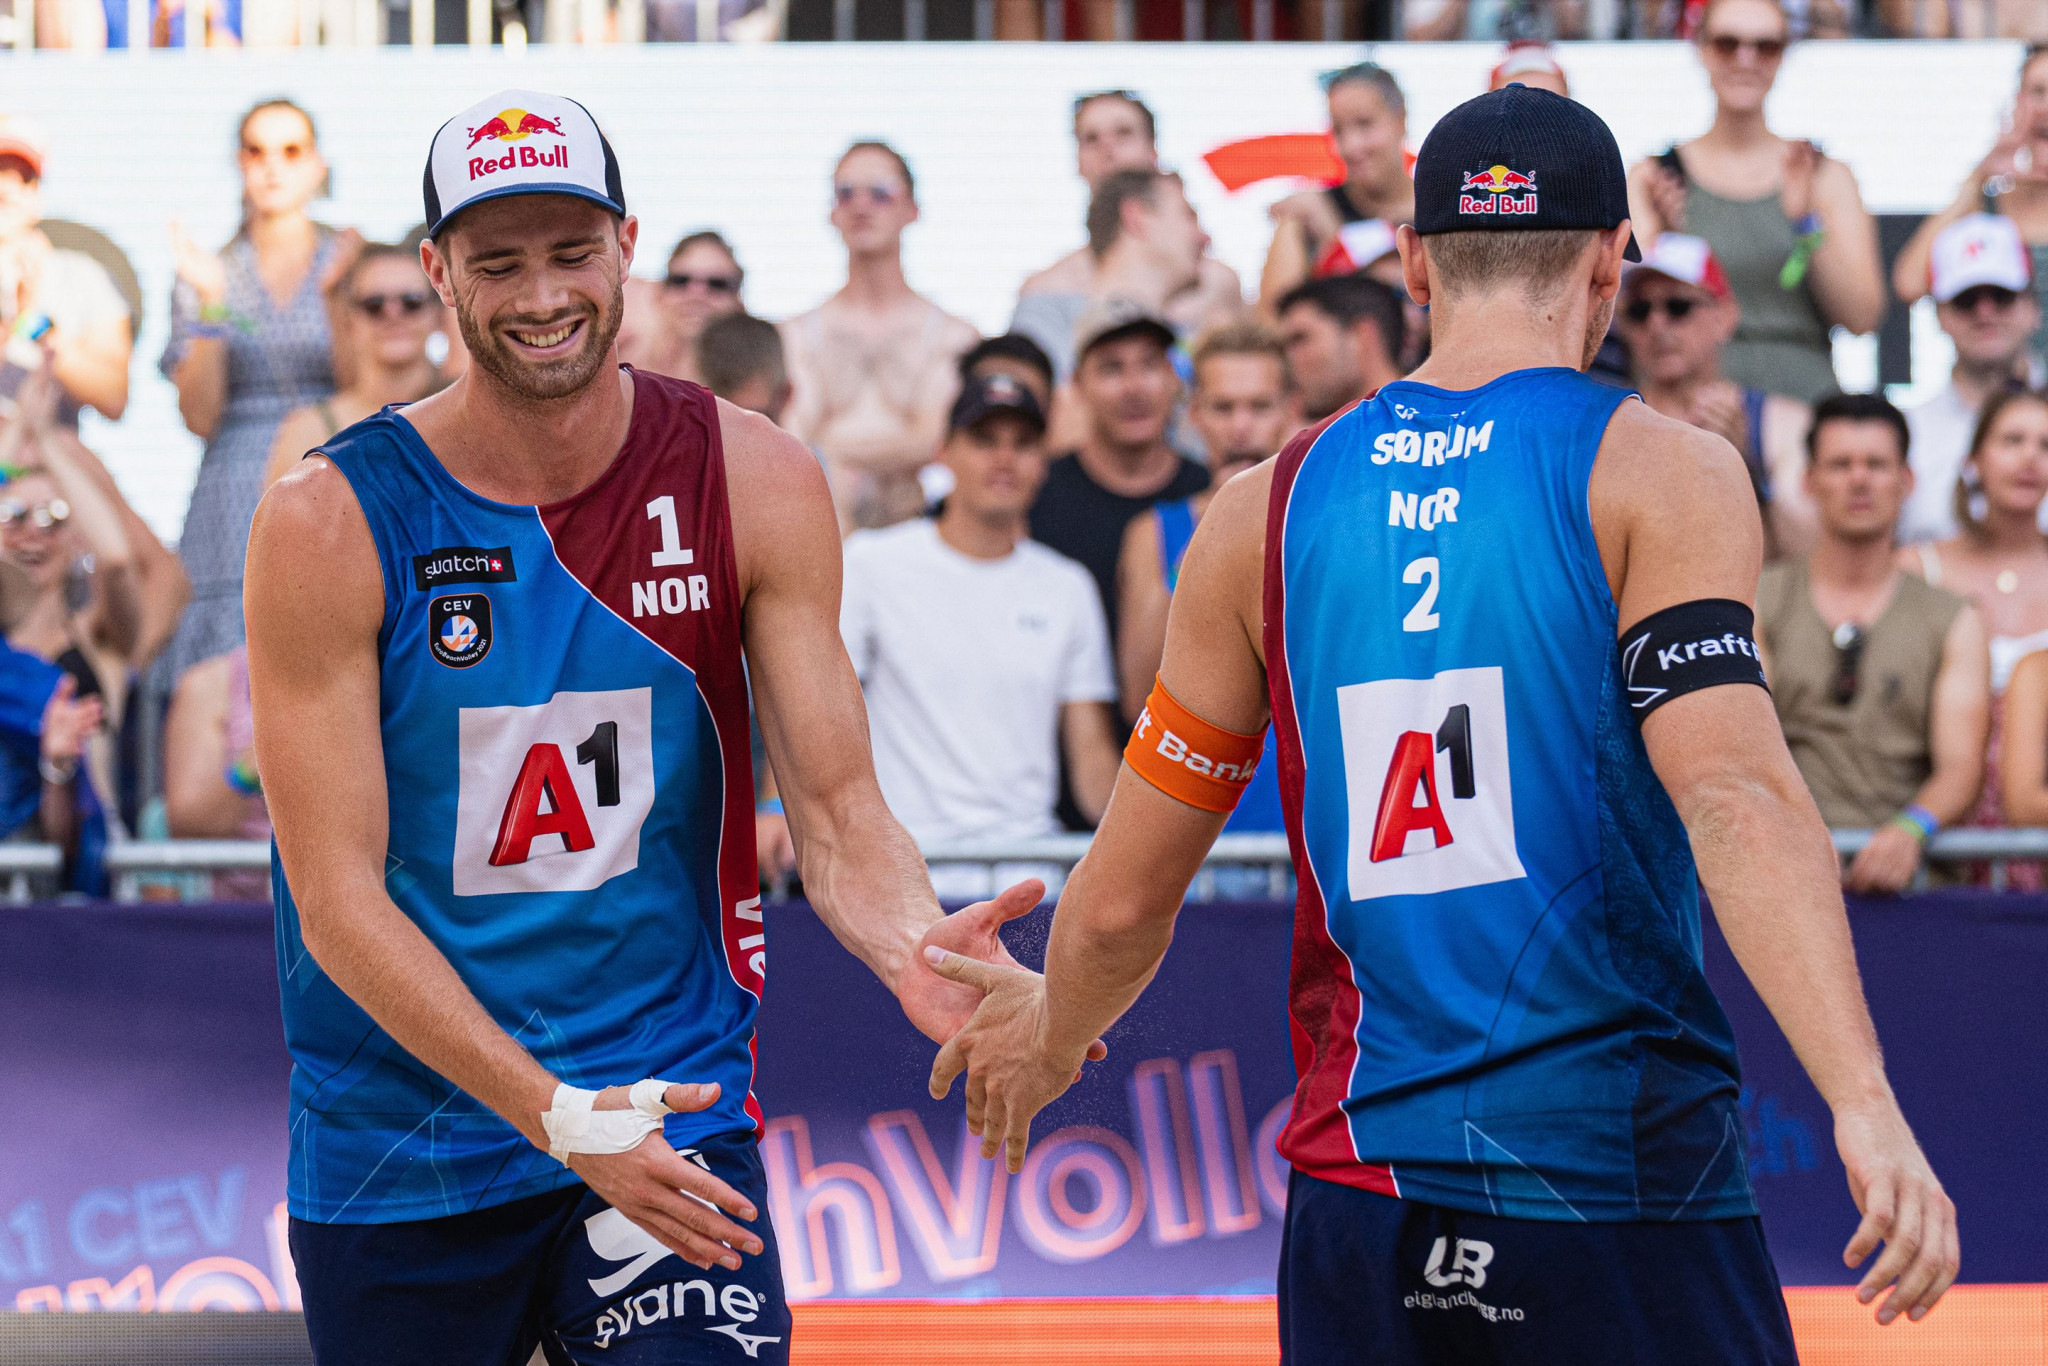 Anders Mol and Christian Sørum are into the Beach Volleyball World Championships quarter-finals ©Getty Images